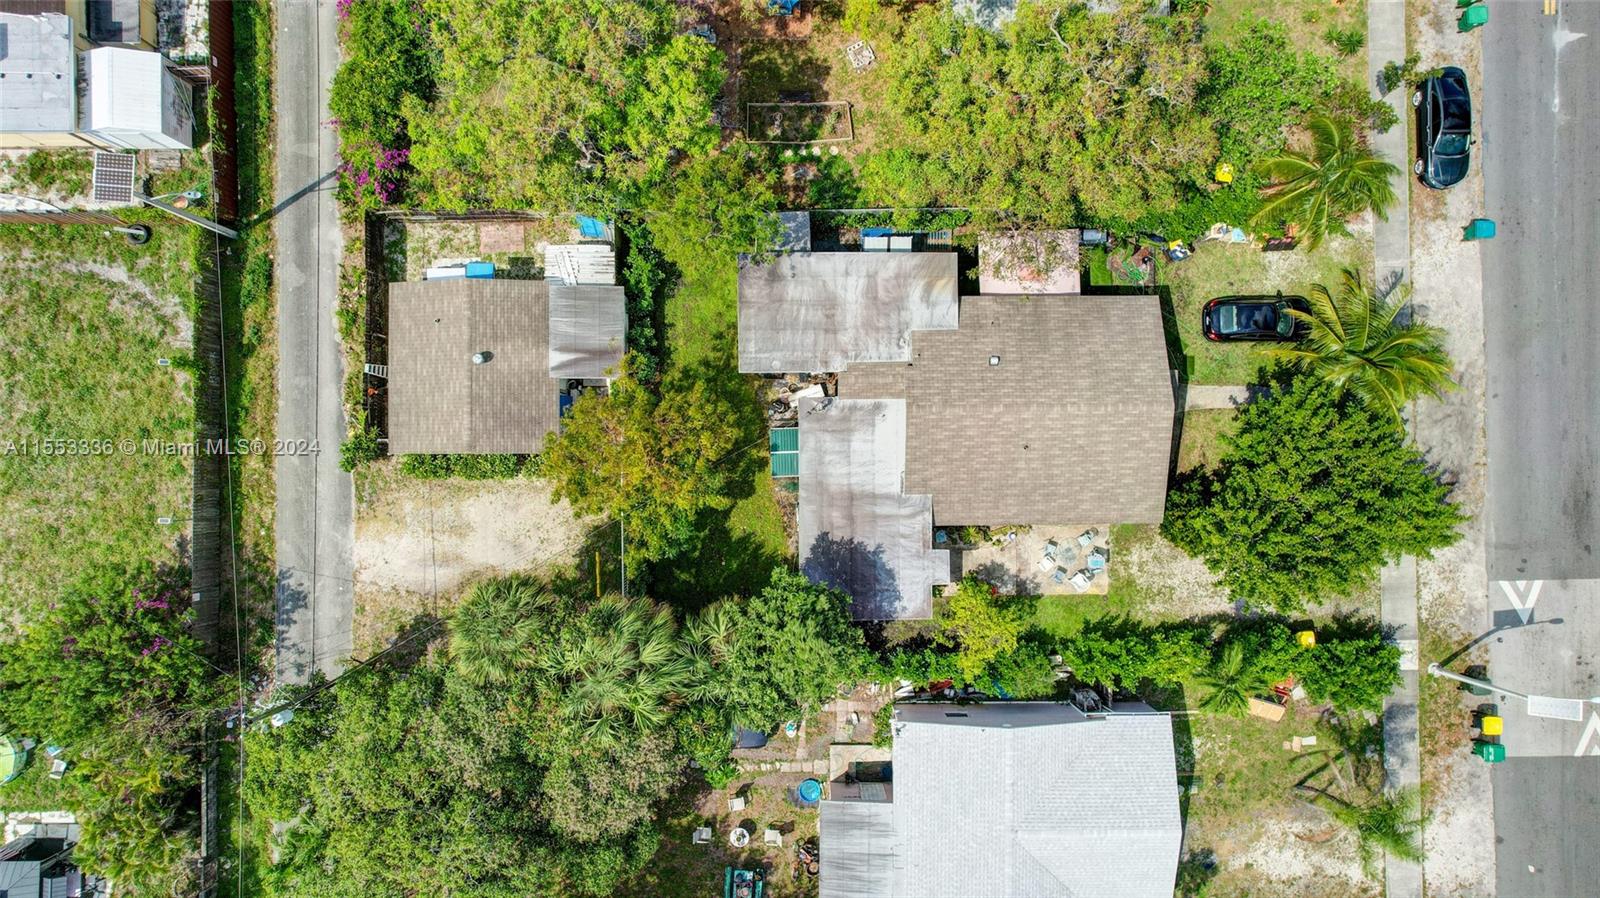 an aerial view of a house with a yard and garden